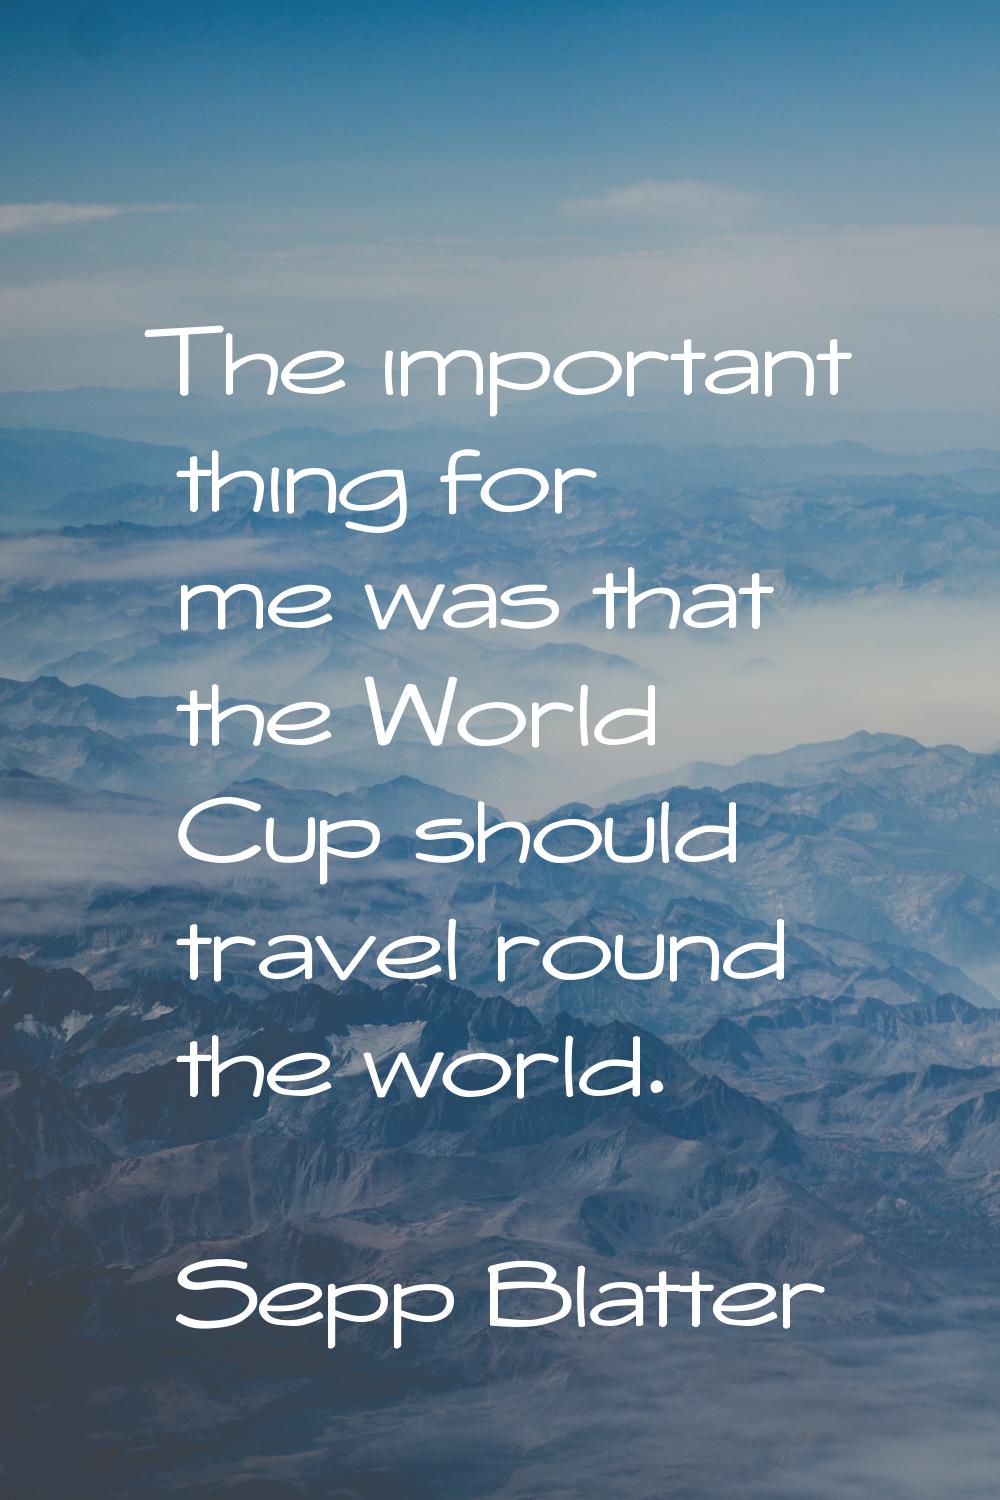 The important thing for me was that the World Cup should travel round the world.